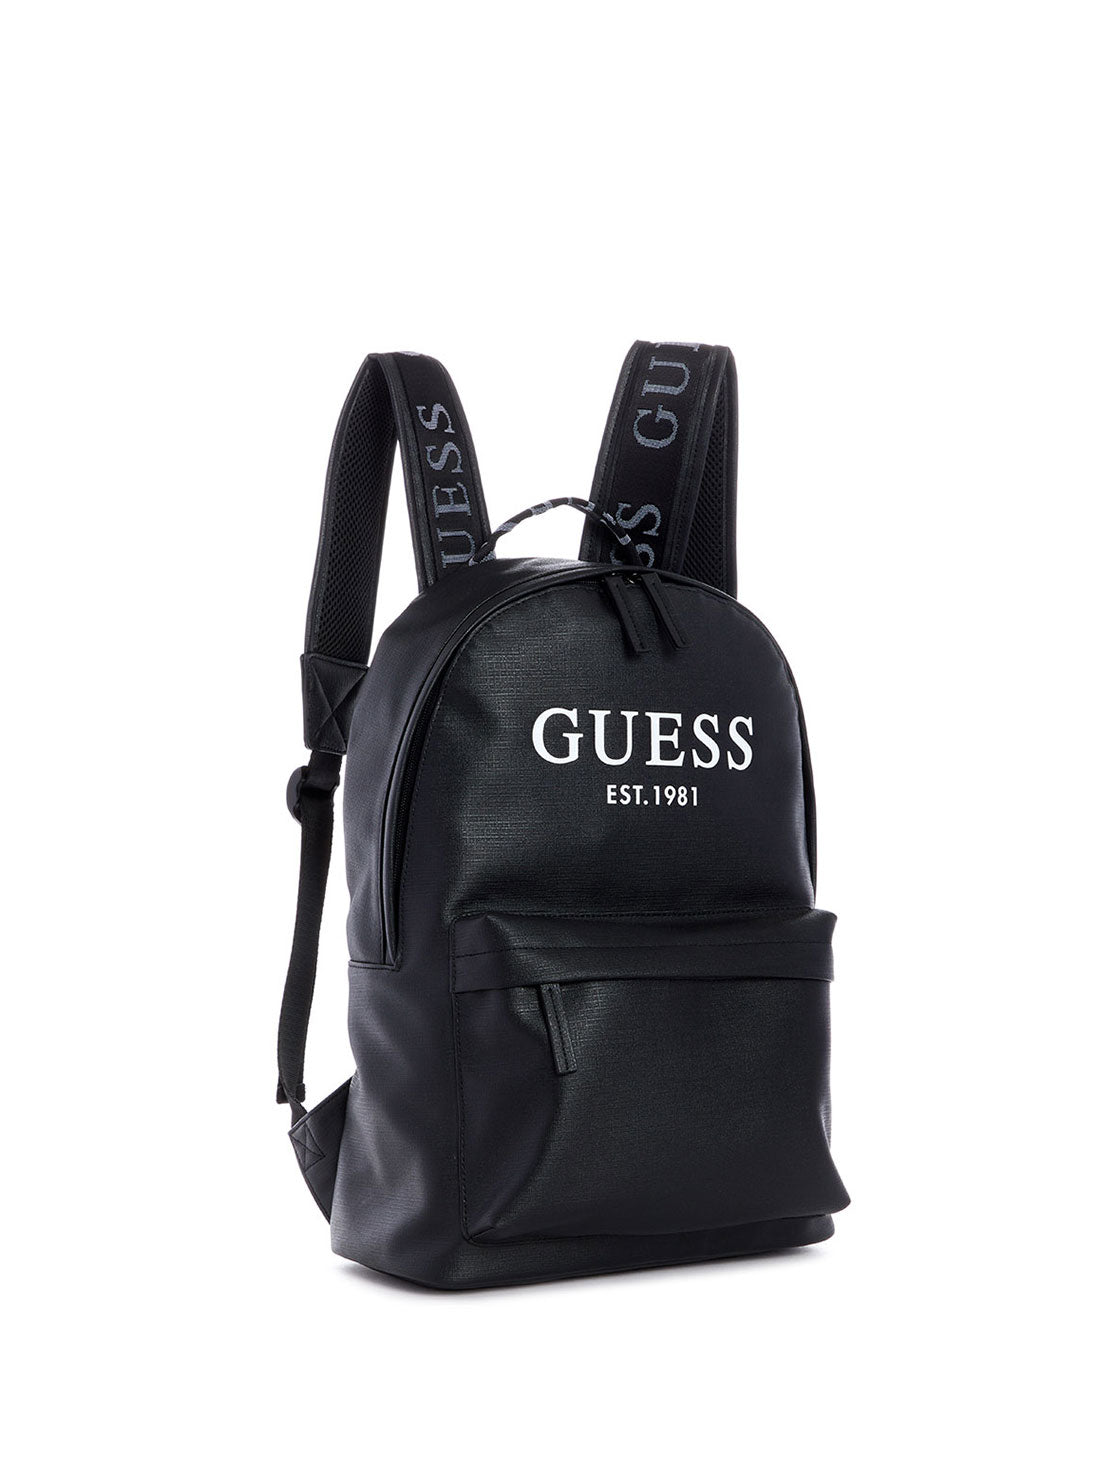 GUESS Men's Black Logo Outfitter Backpack VY753598 Front Side View